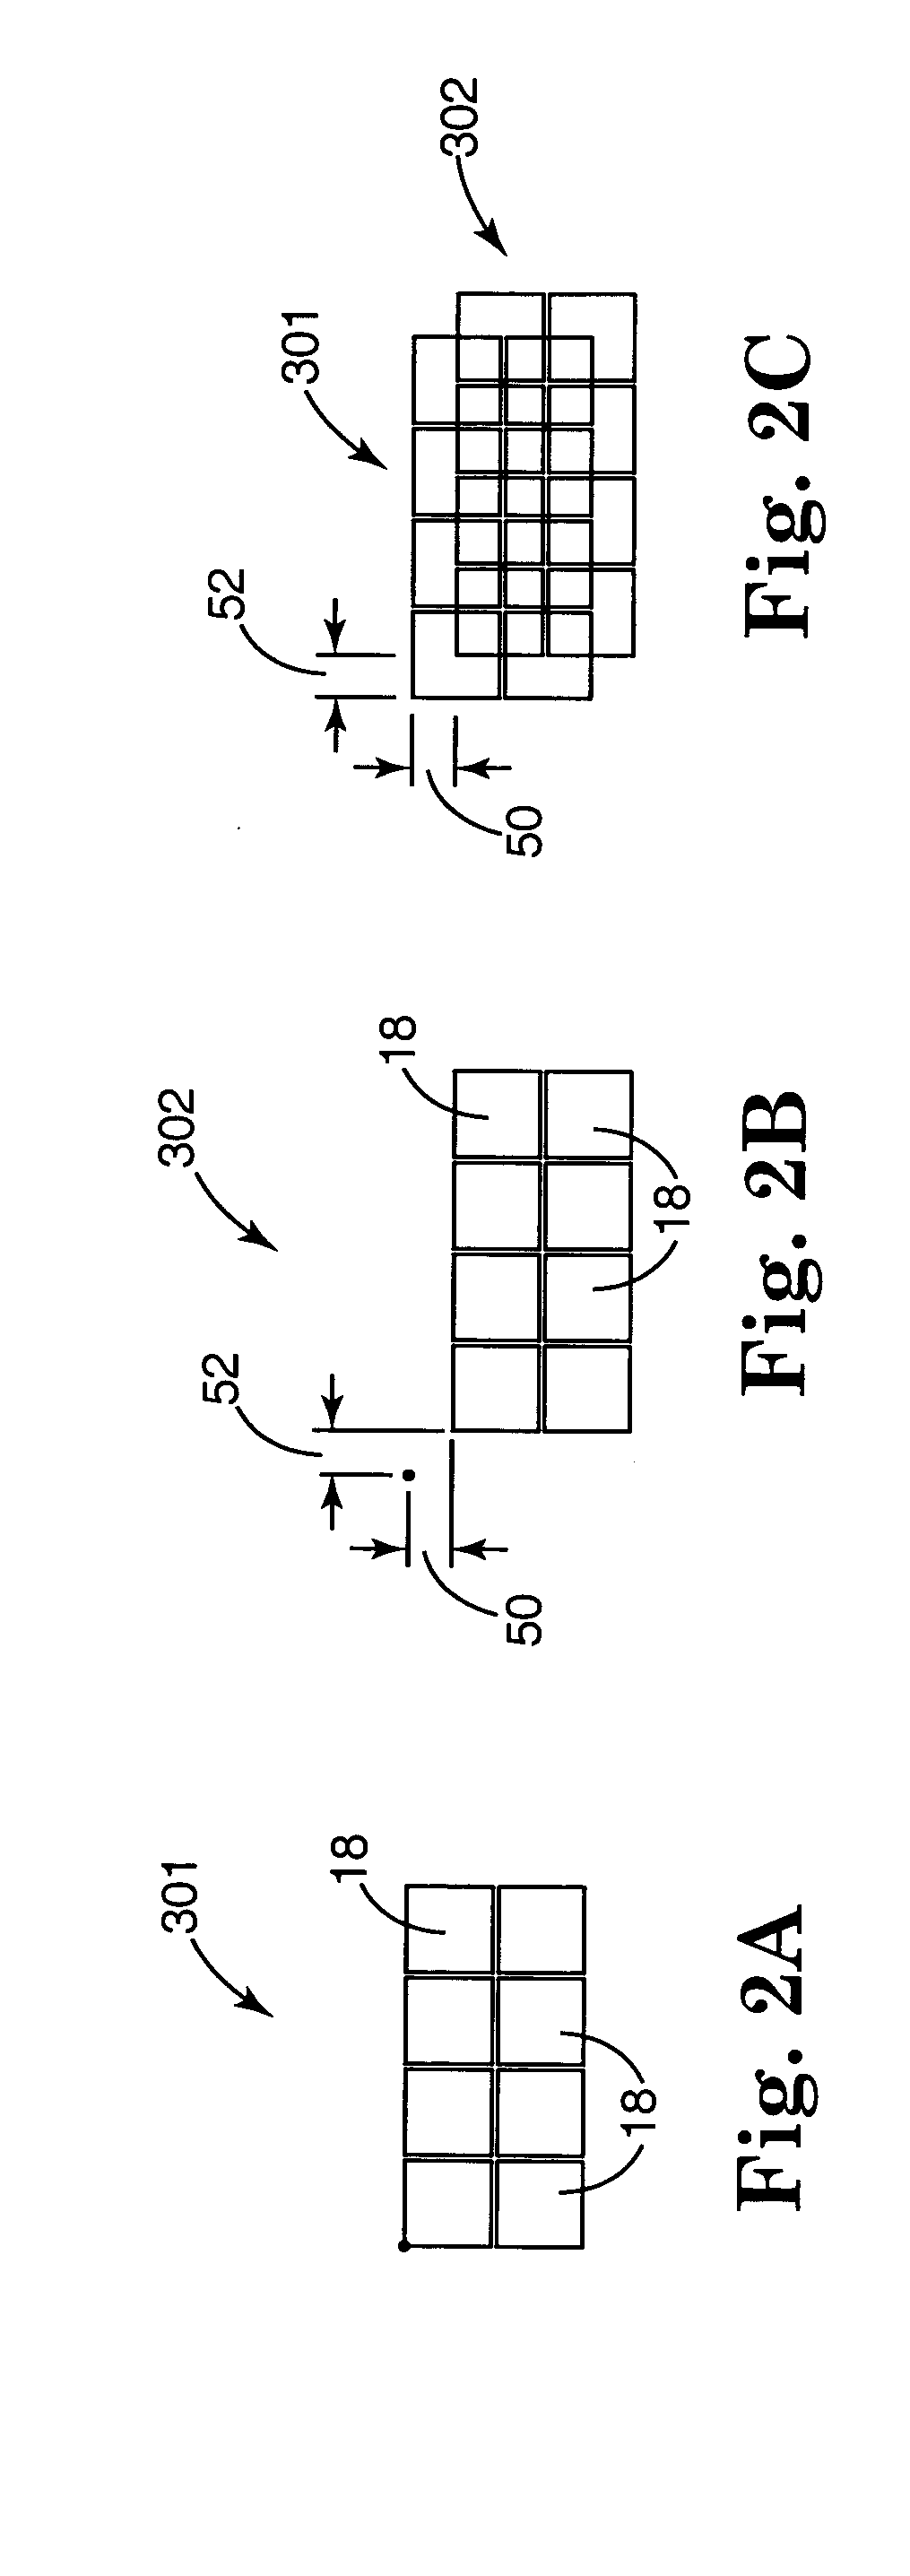 Generating and displaying spatially offset sub-frames